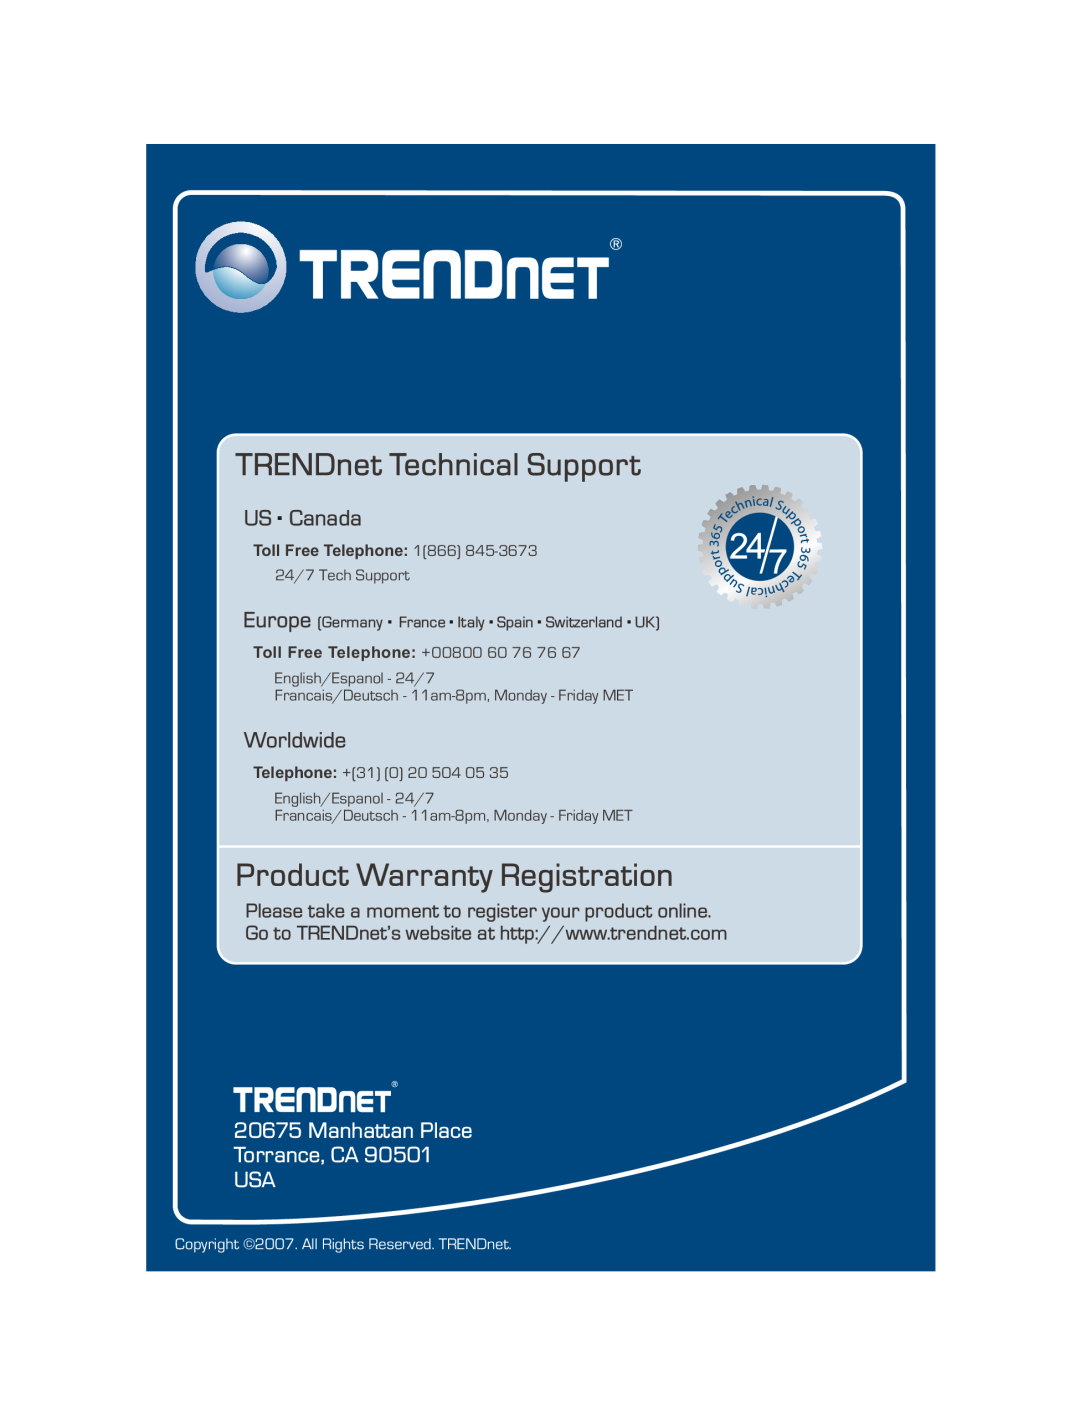 TRENDnet TPE-S44 TRENDnet Technical Support, Product Warranty Registration, US . Canada, Worldwide, Toll Free Telephone 